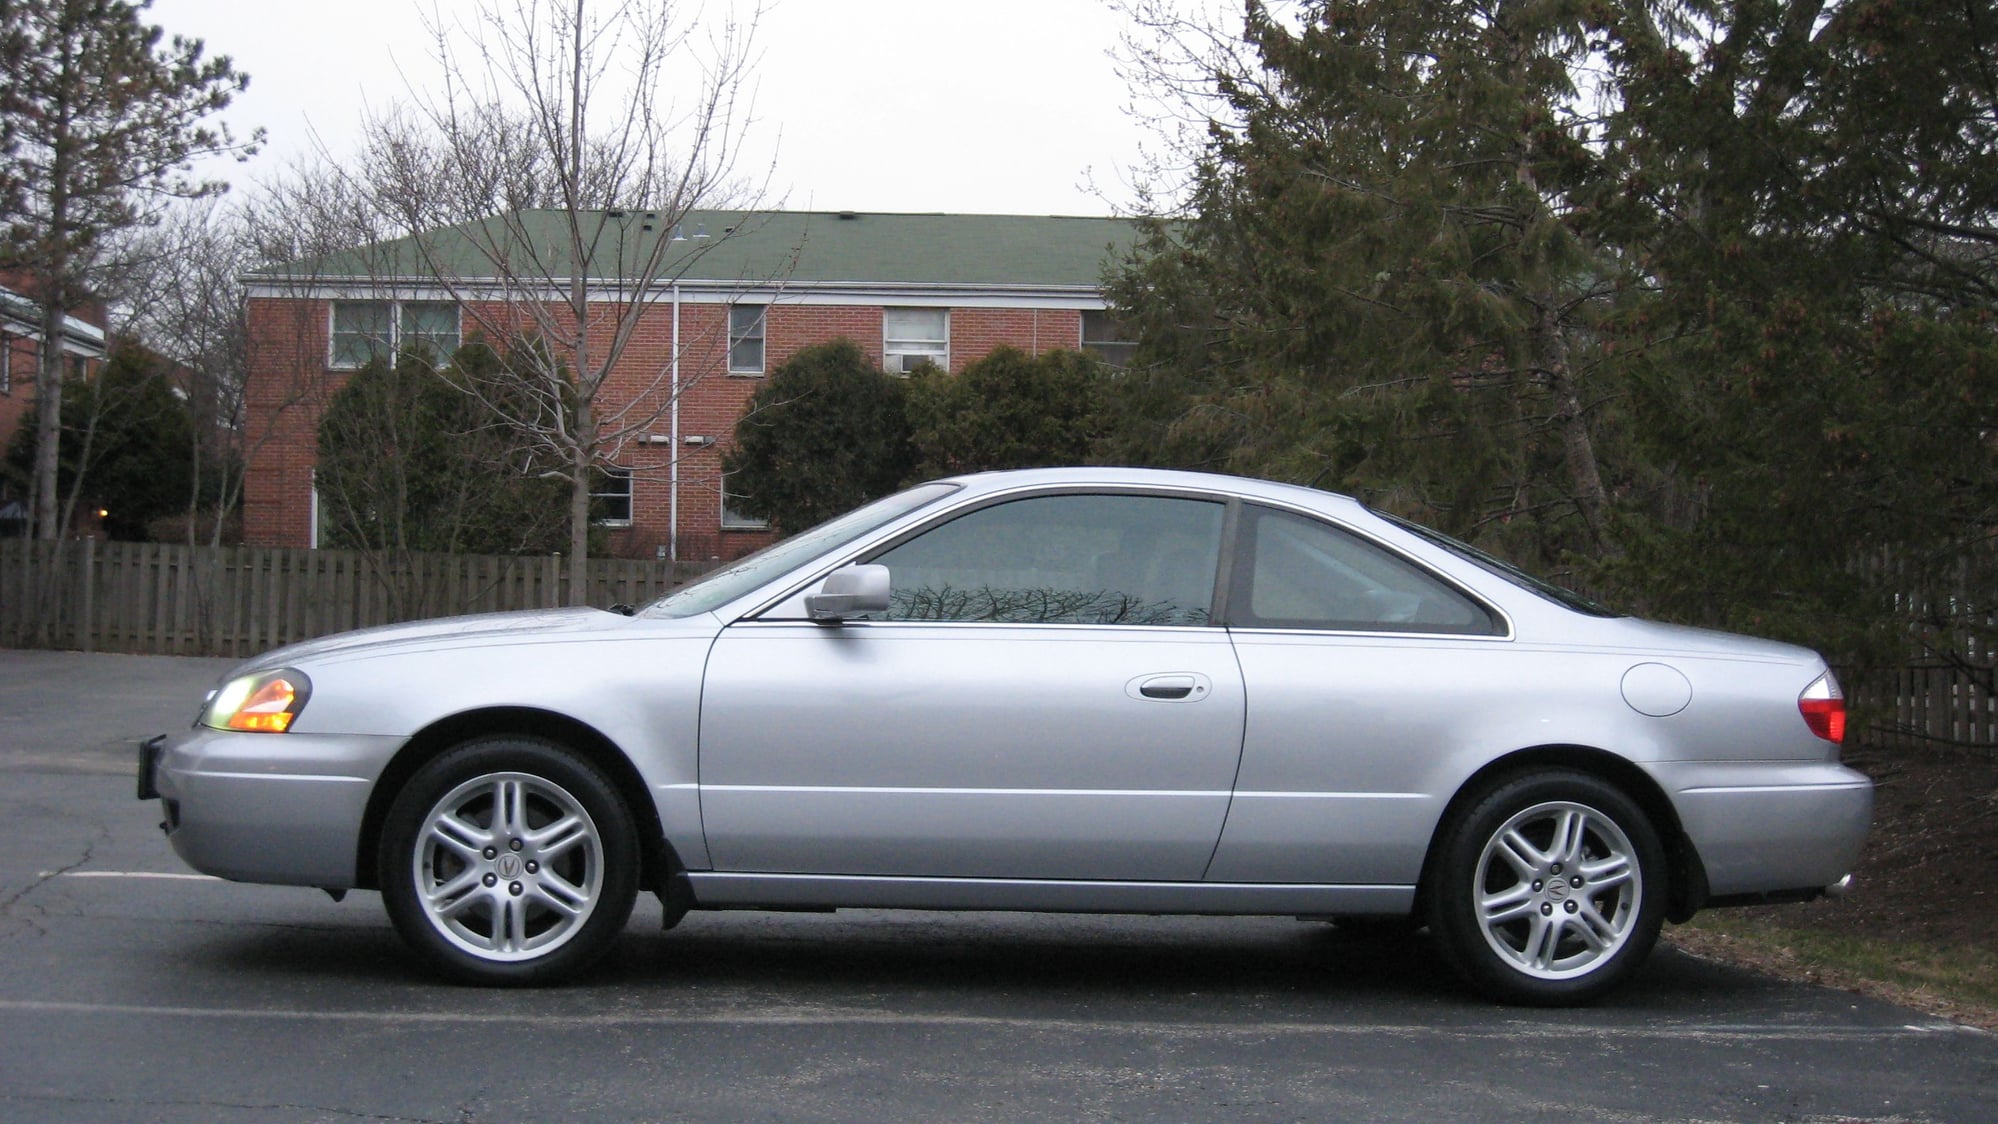 2003 Acura CL - EXPIRED: Pristine Acura 3.2 CL Type-S 6-speed w/Navi - Used - VIN 19UYA41733A007771 - 133,000 Miles - 6 cyl - 2WD - Manual - Coupe - Silver - Chicago, IL 60026, United States